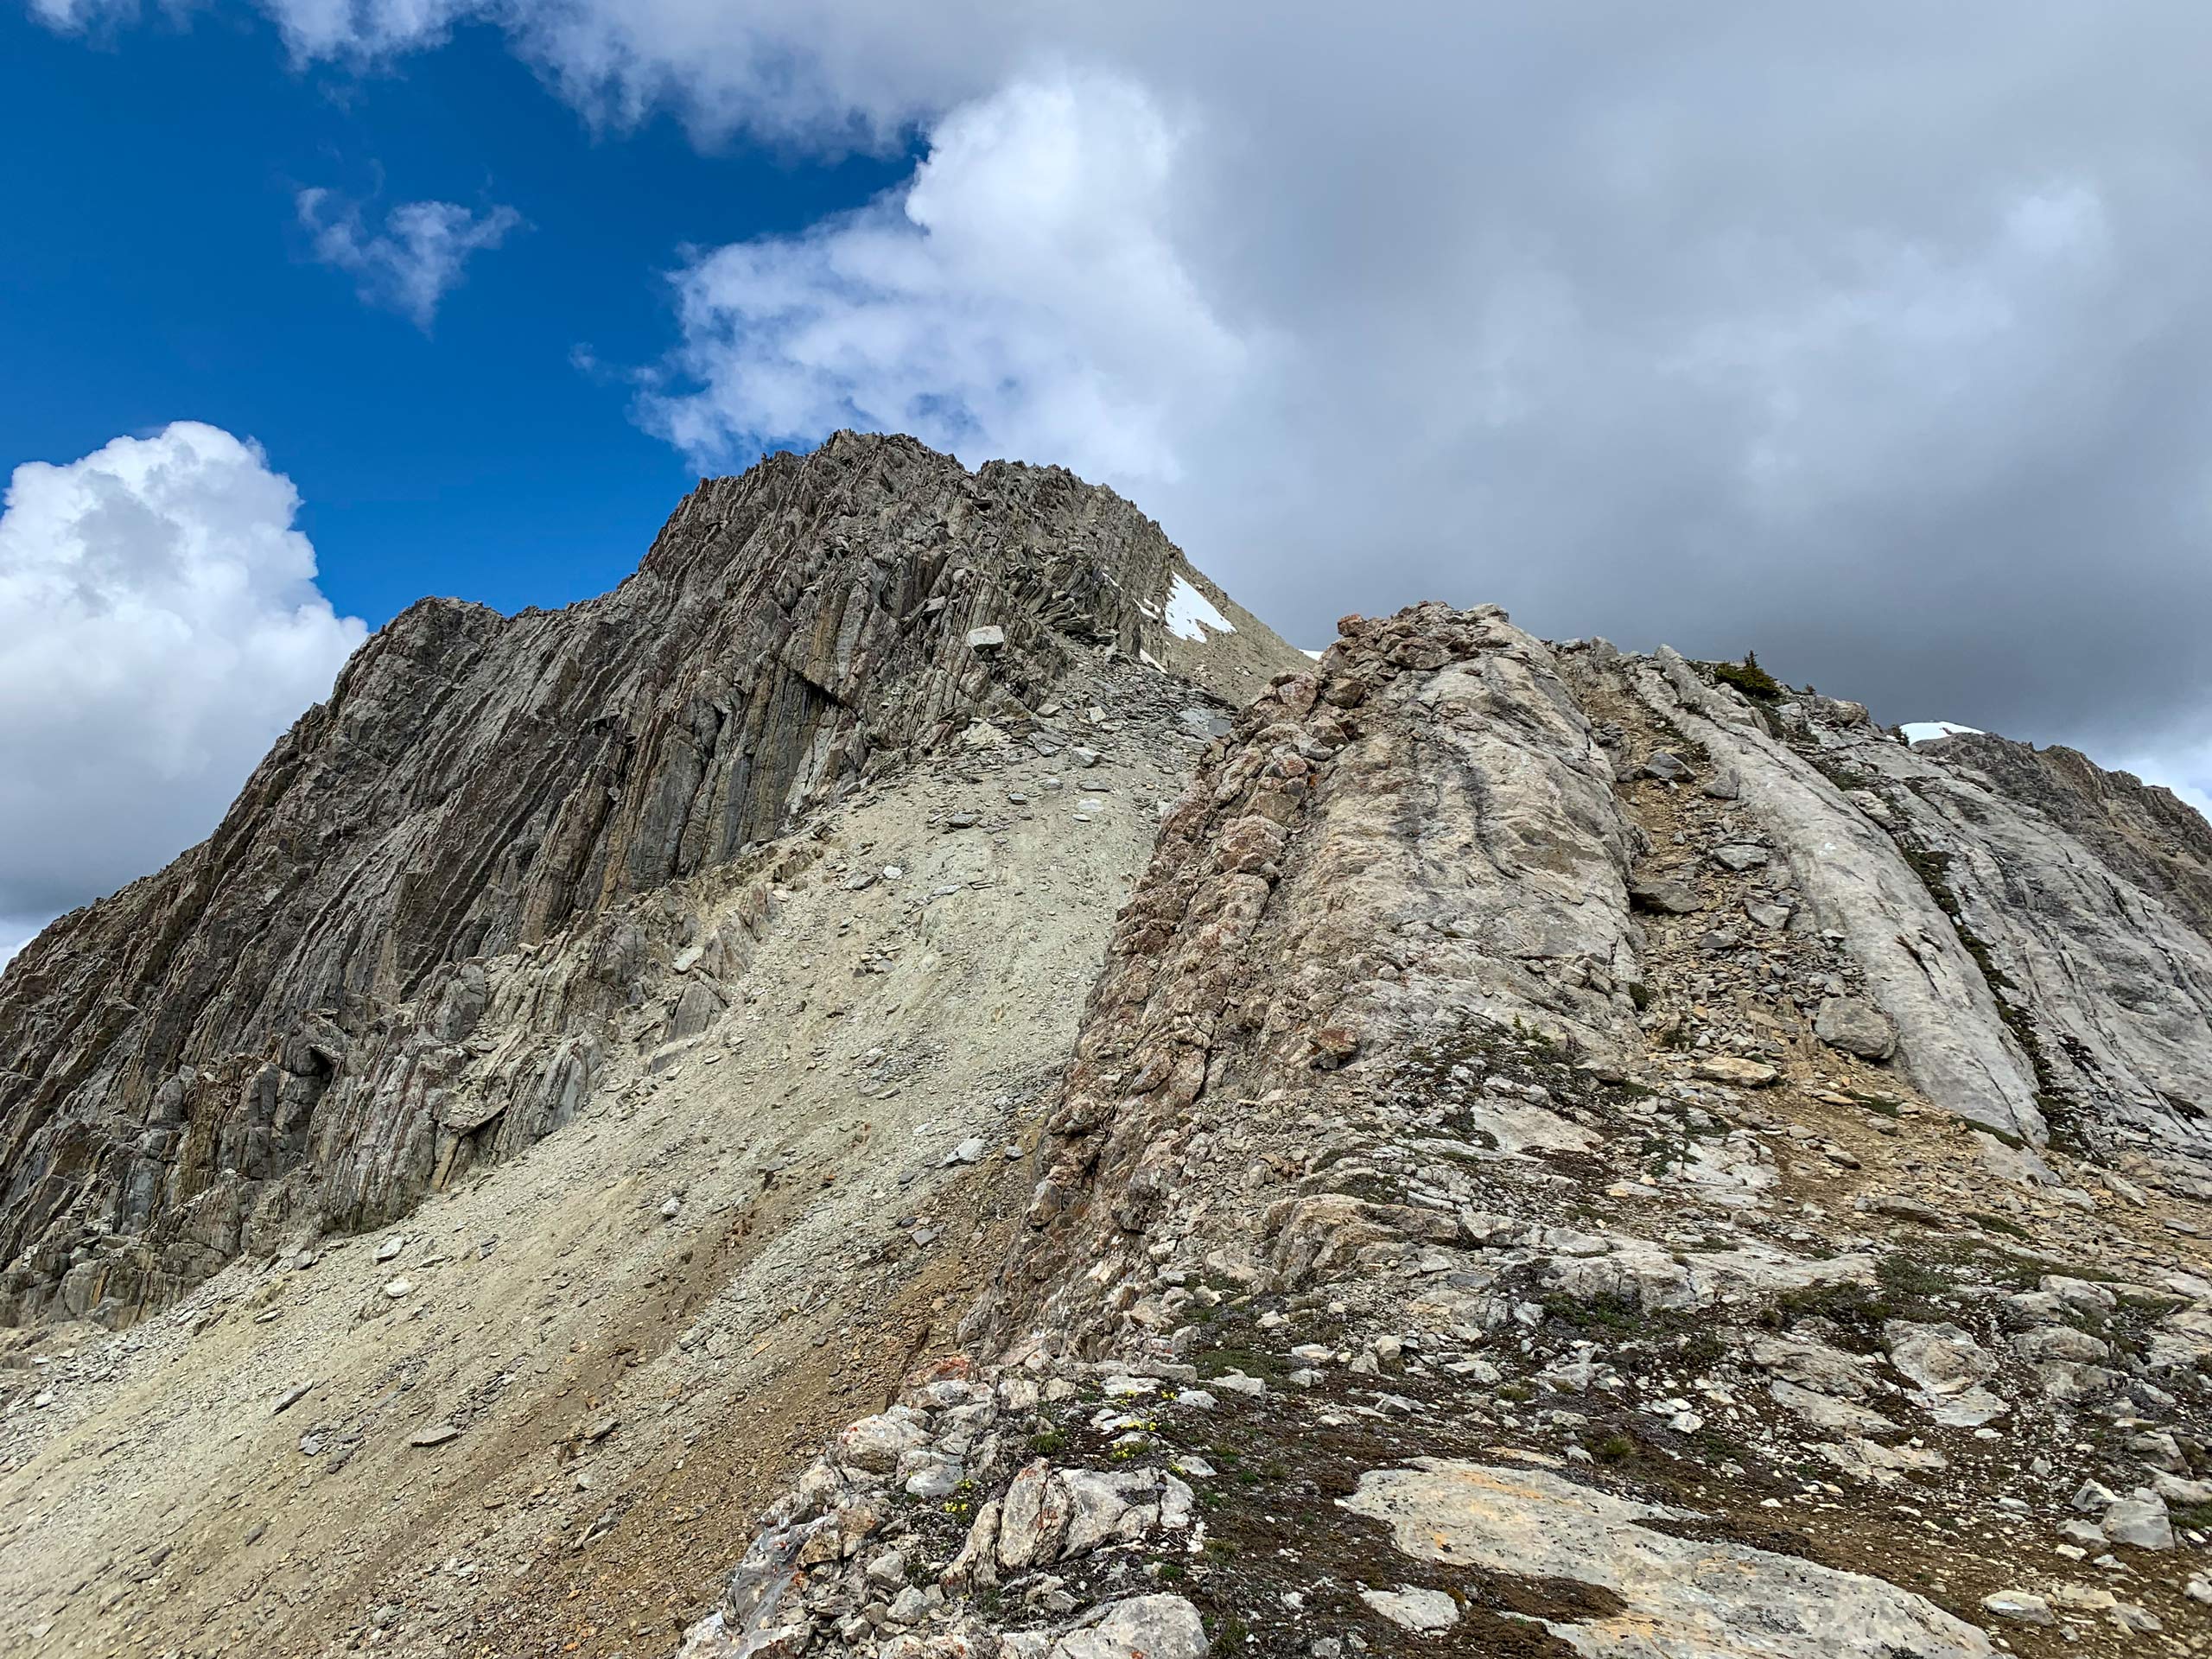 Looking up to the summit of Mount Cory Scramble